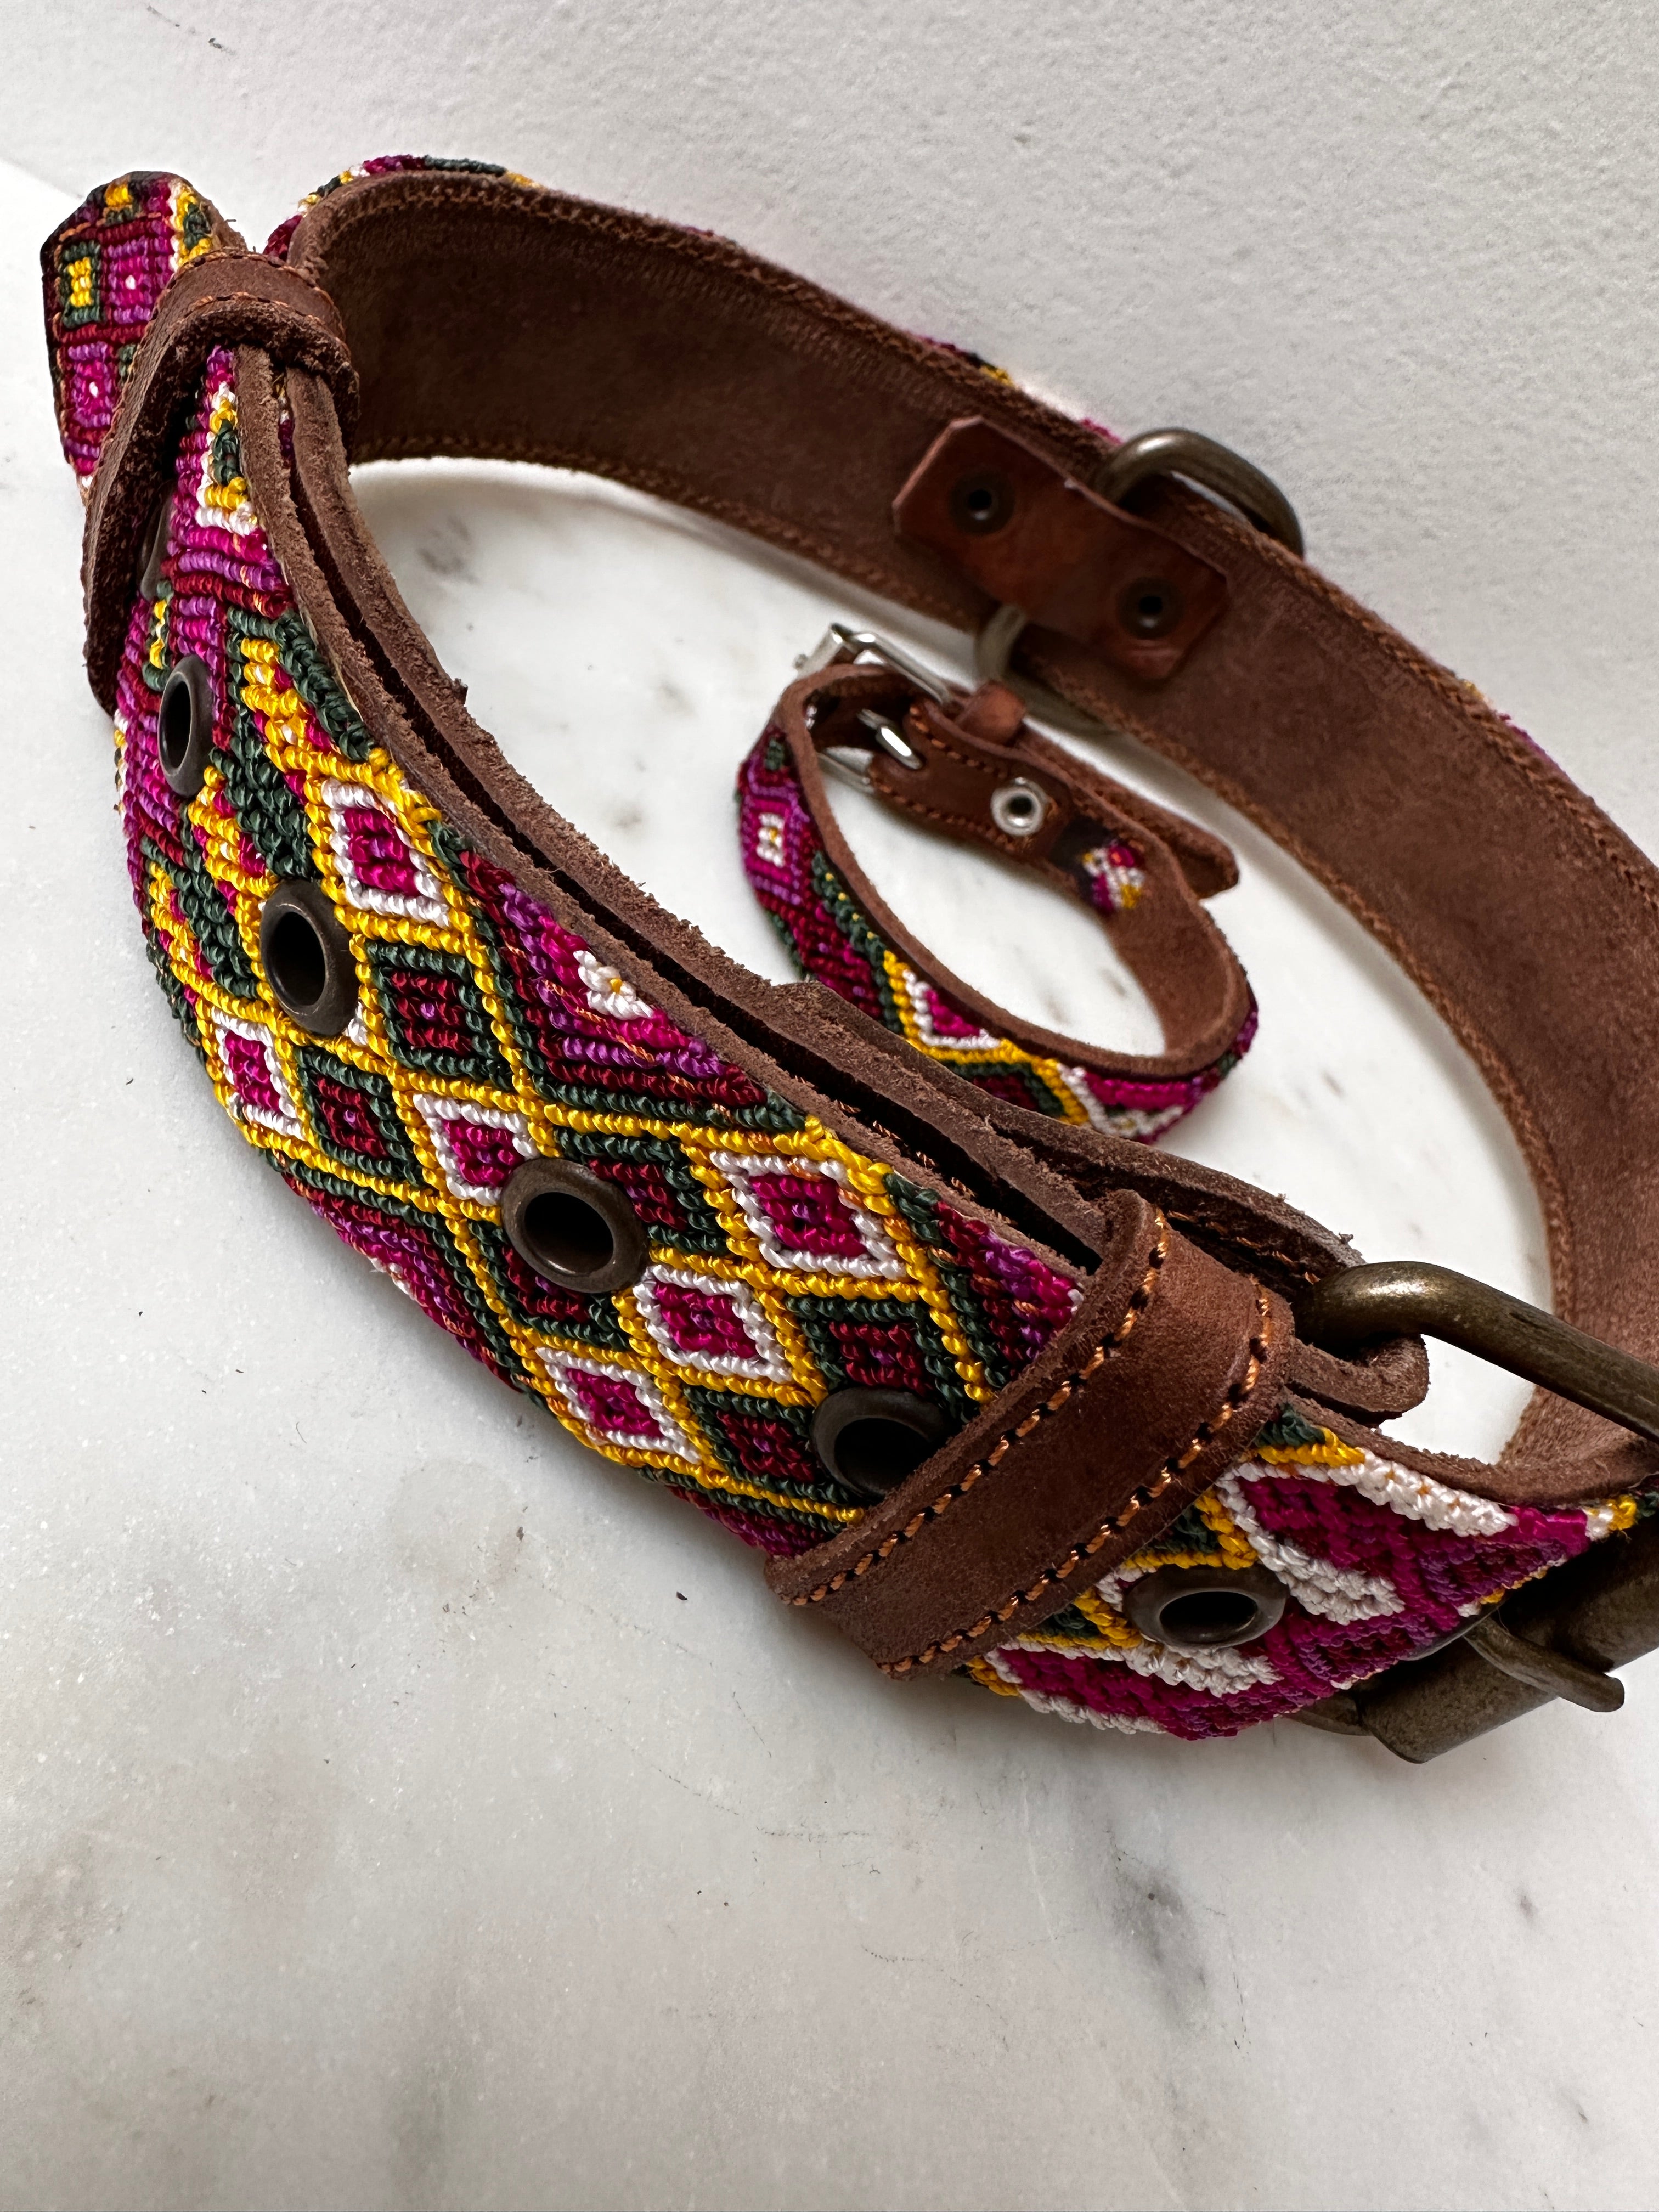 Future Nomads Homewares One Size Huichol Embroidered Wide Dog Collar XL1